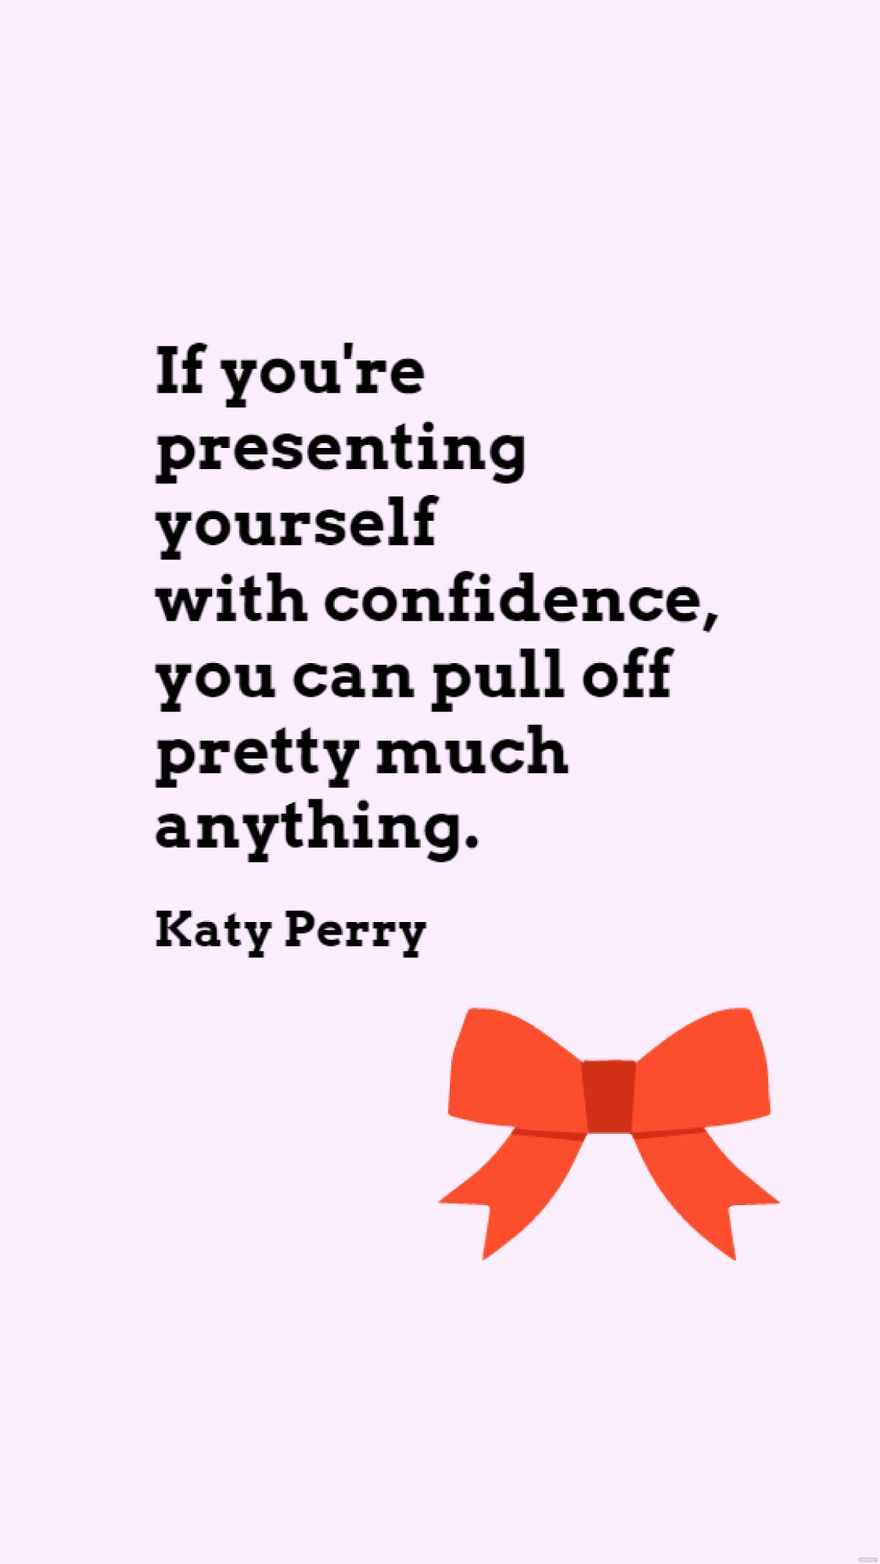 Katy Perry - If you're presenting yourself with confidence, you can pull off pretty much anything.